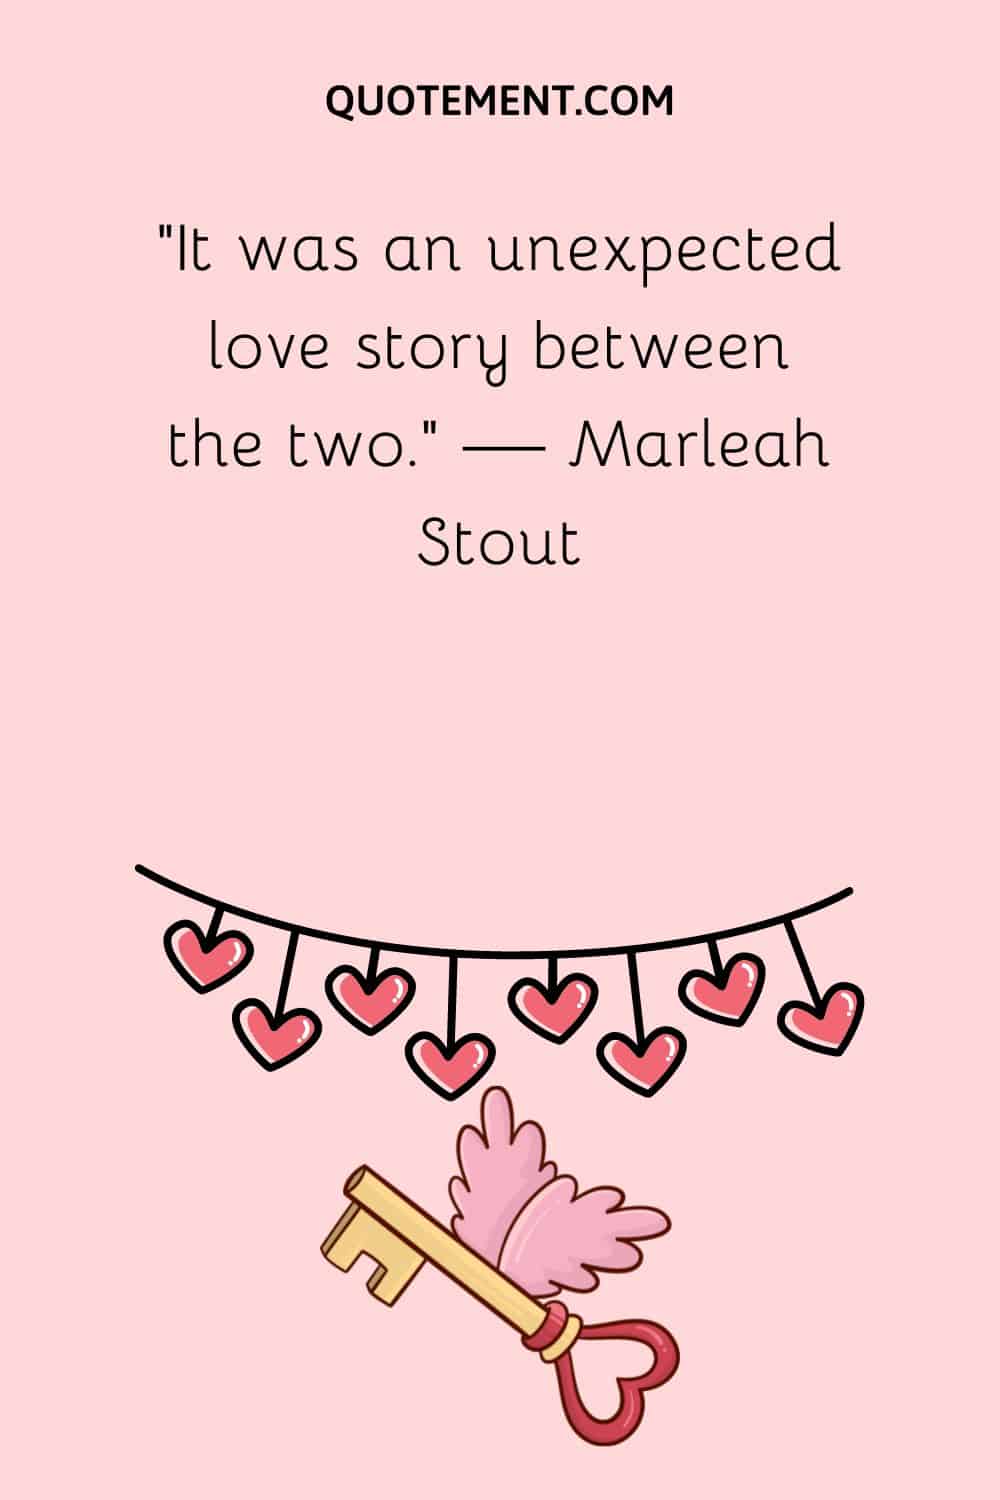 “It was an unexpected love story between the two.” — Marleah Stout